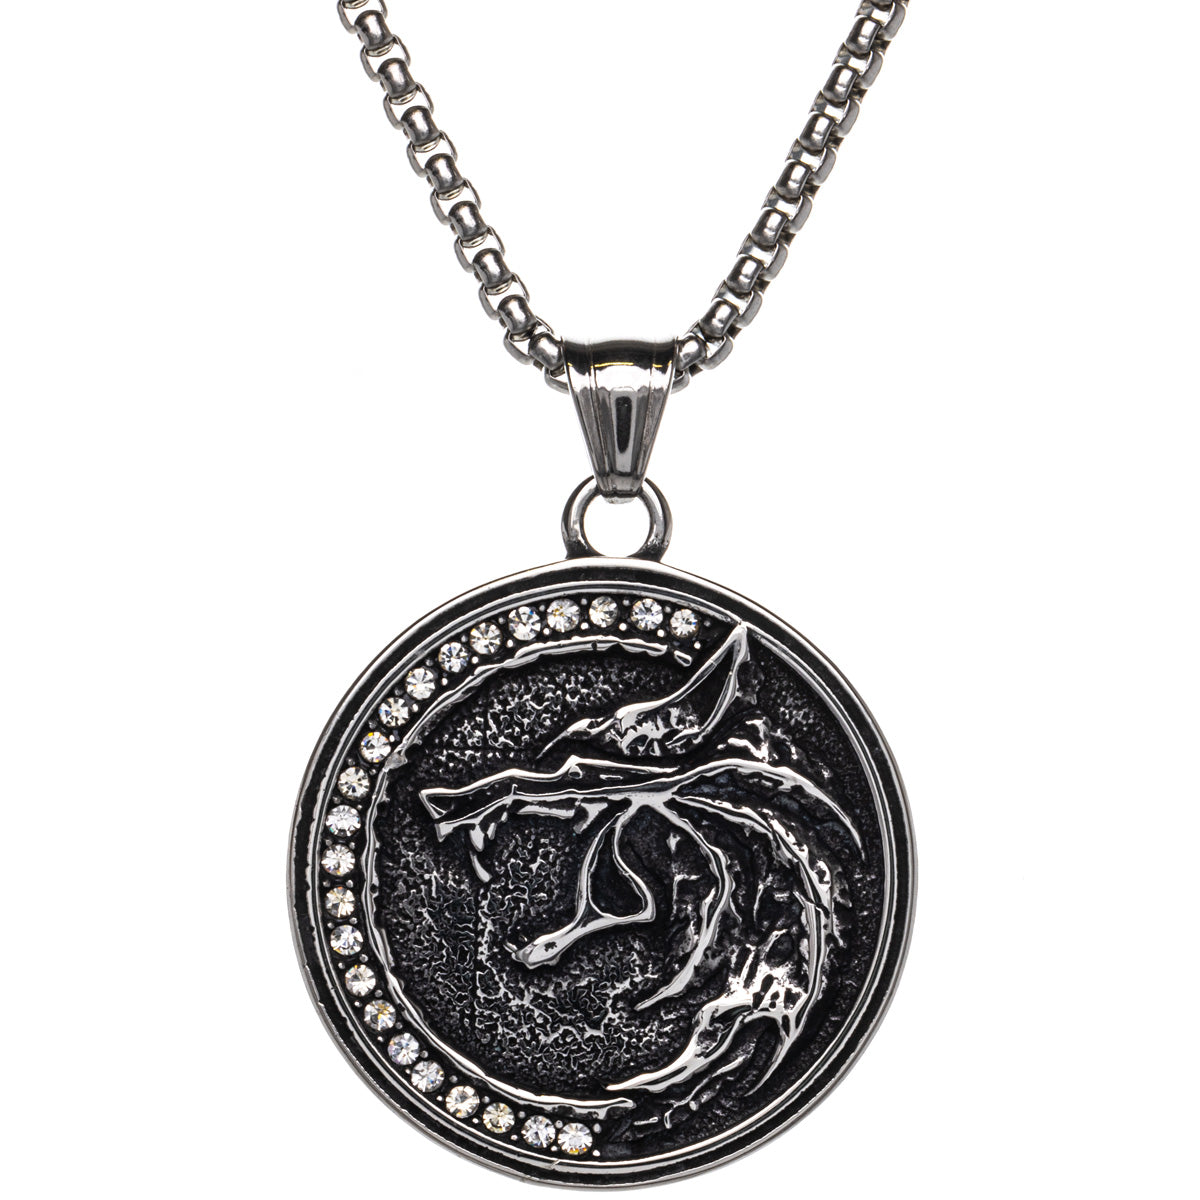 Fenrir wolf pendant necklace with stones (Steel 316L)